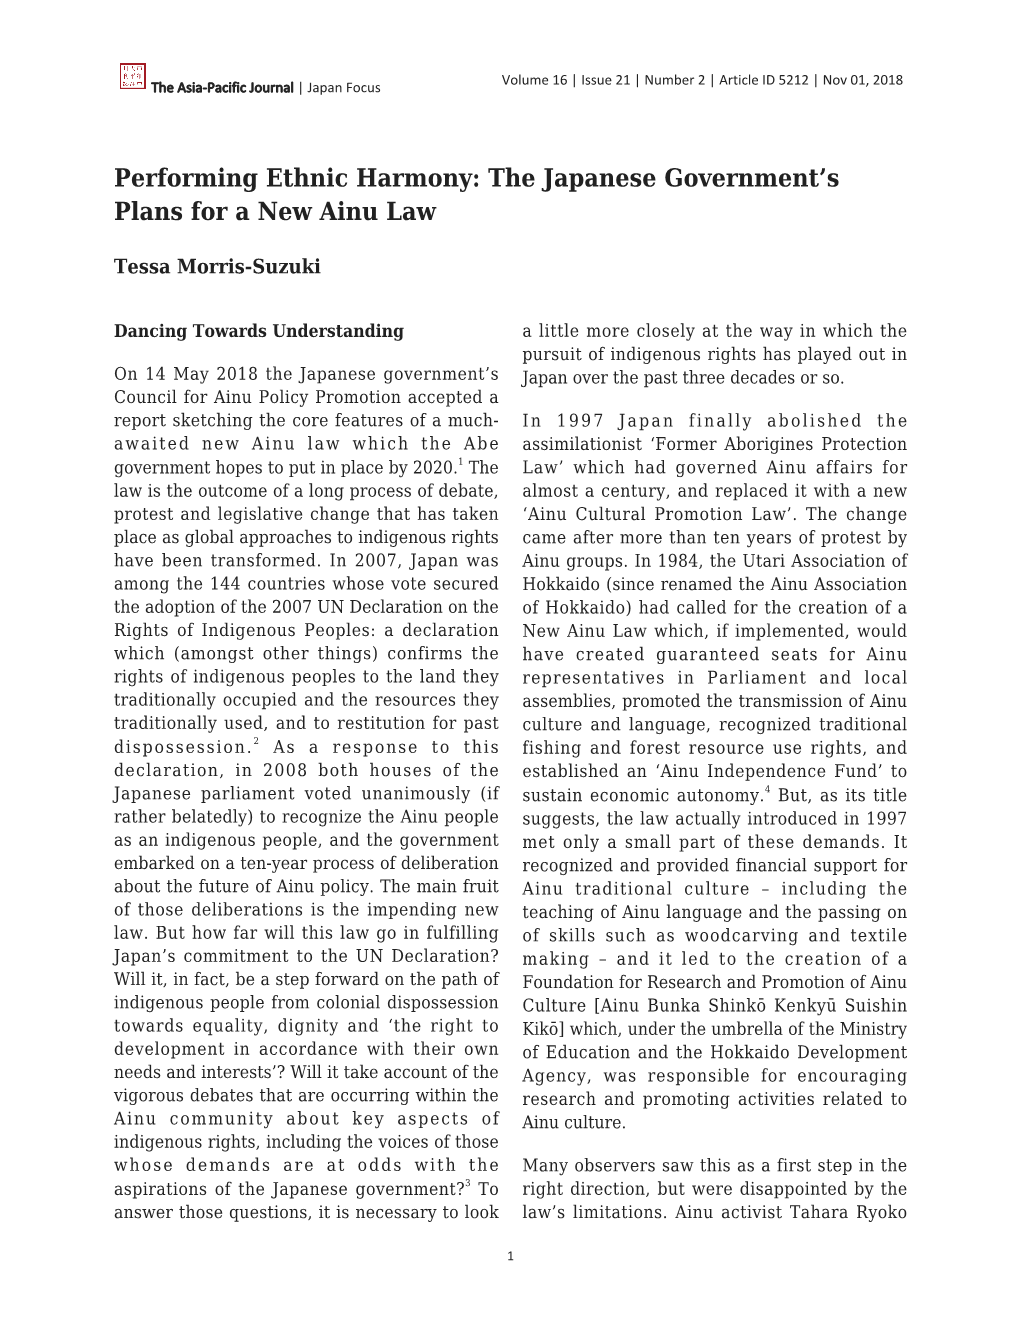 Performing Ethnic Harmony: the Japanese Government's Plans for A